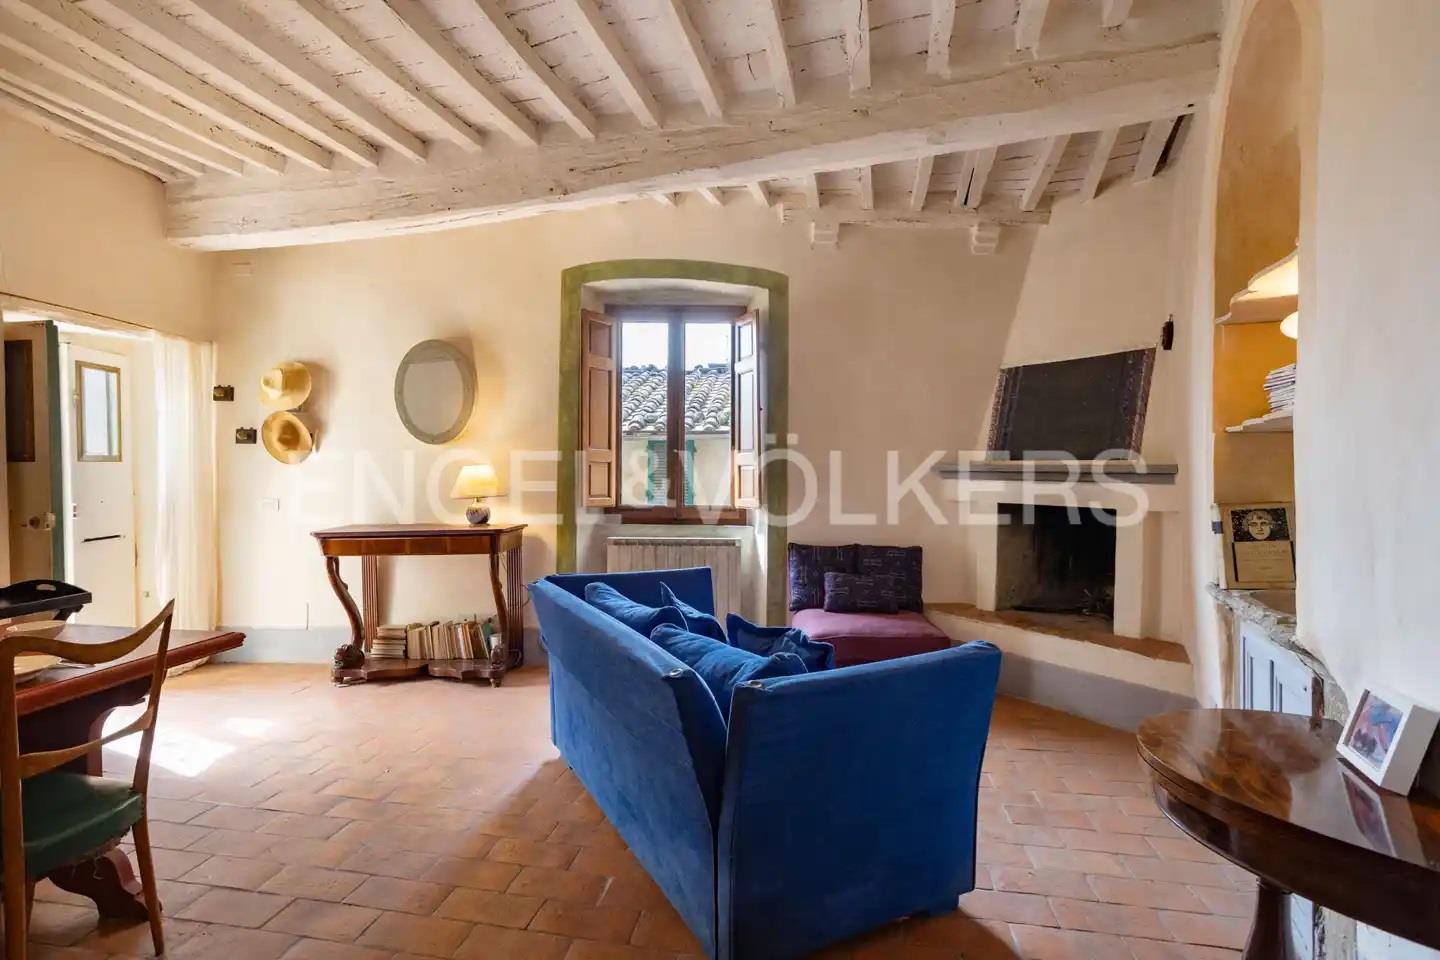 Authentic charm in the heart of picturesque Cetona